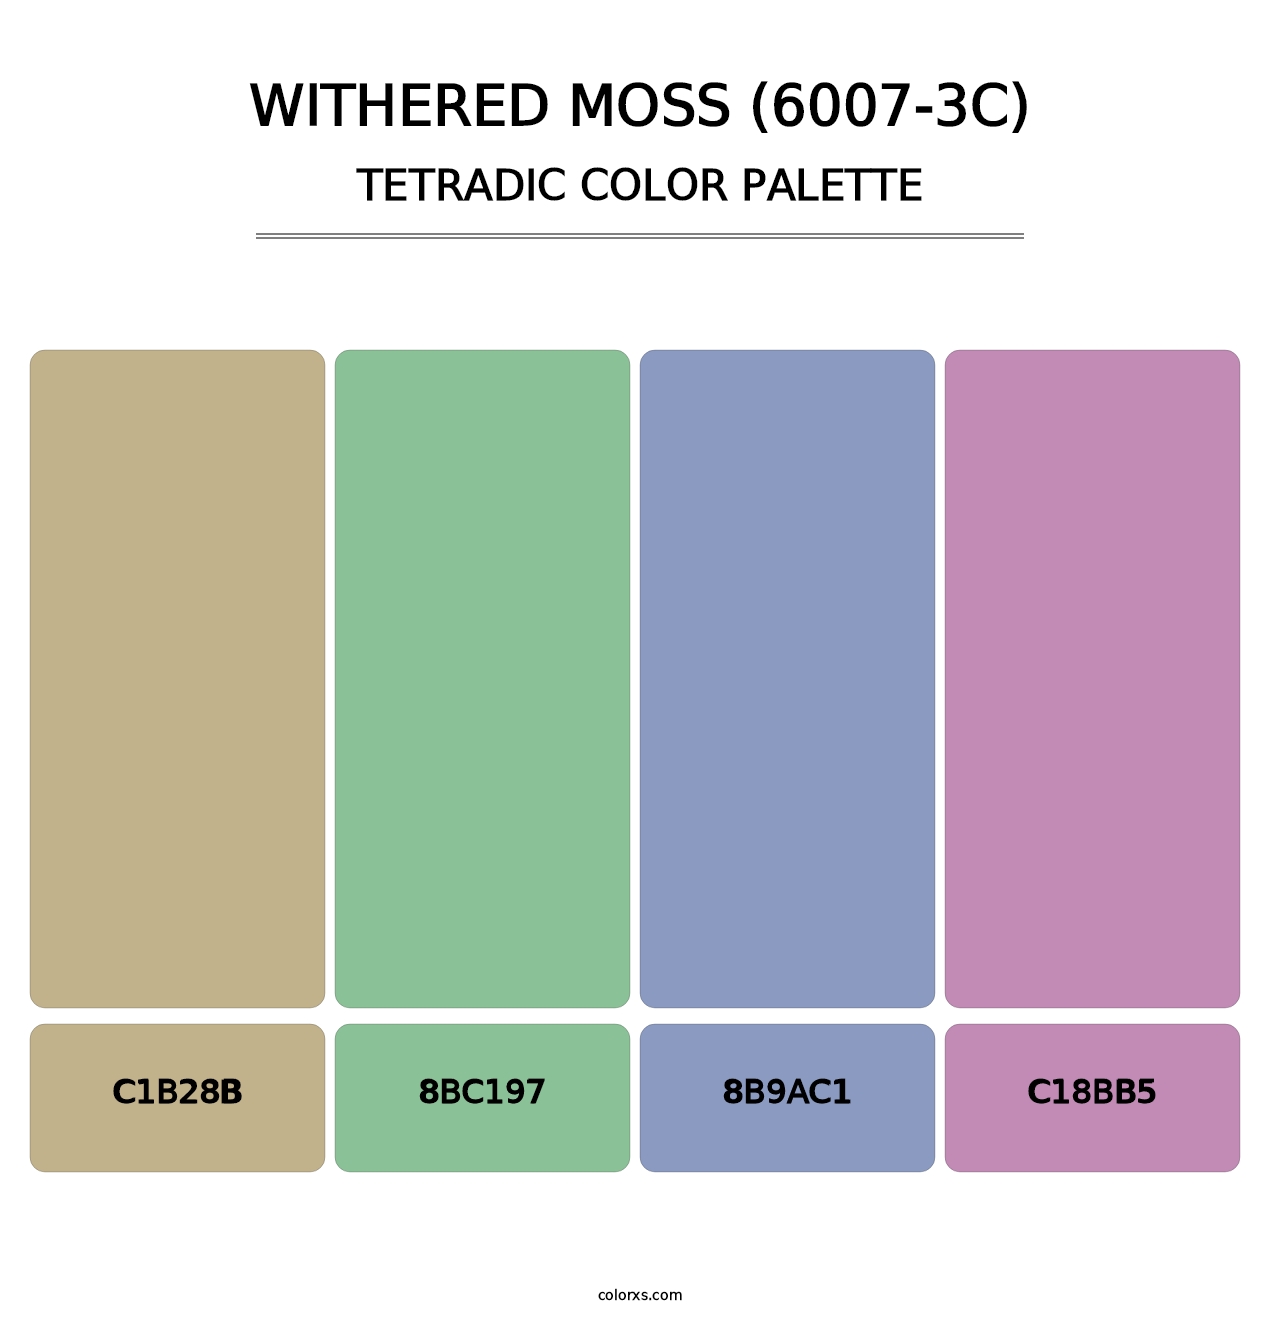 Withered Moss (6007-3C) - Tetradic Color Palette